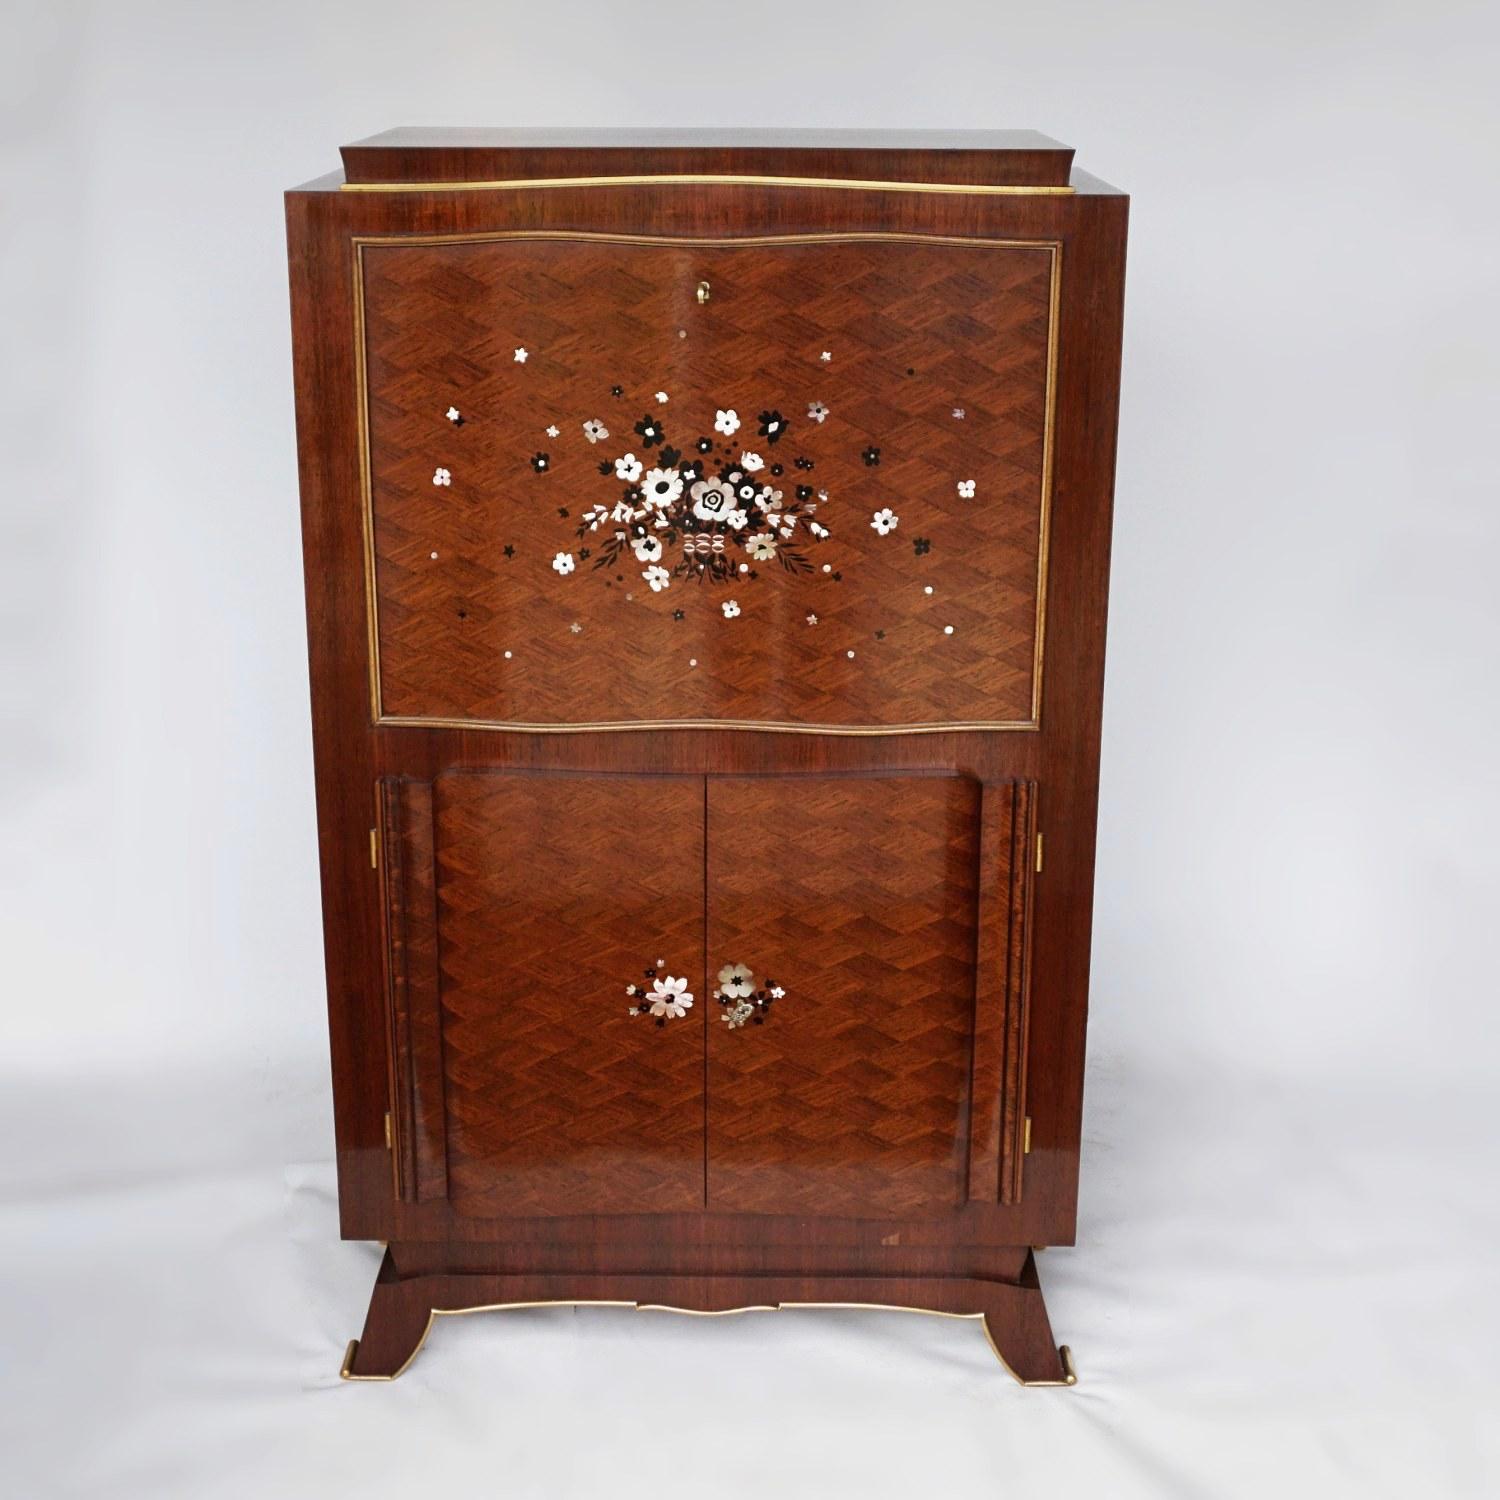 An Art Deco rosewood marquetry cocktail cabinet by Jules Leleu, (1883-1961). Stepped top over a parquetry and marquetry inlaid drop-front cocktail cabinet, with ebony and mother of pearl inlay flower decoration. Mirrored lit interior to top, with a